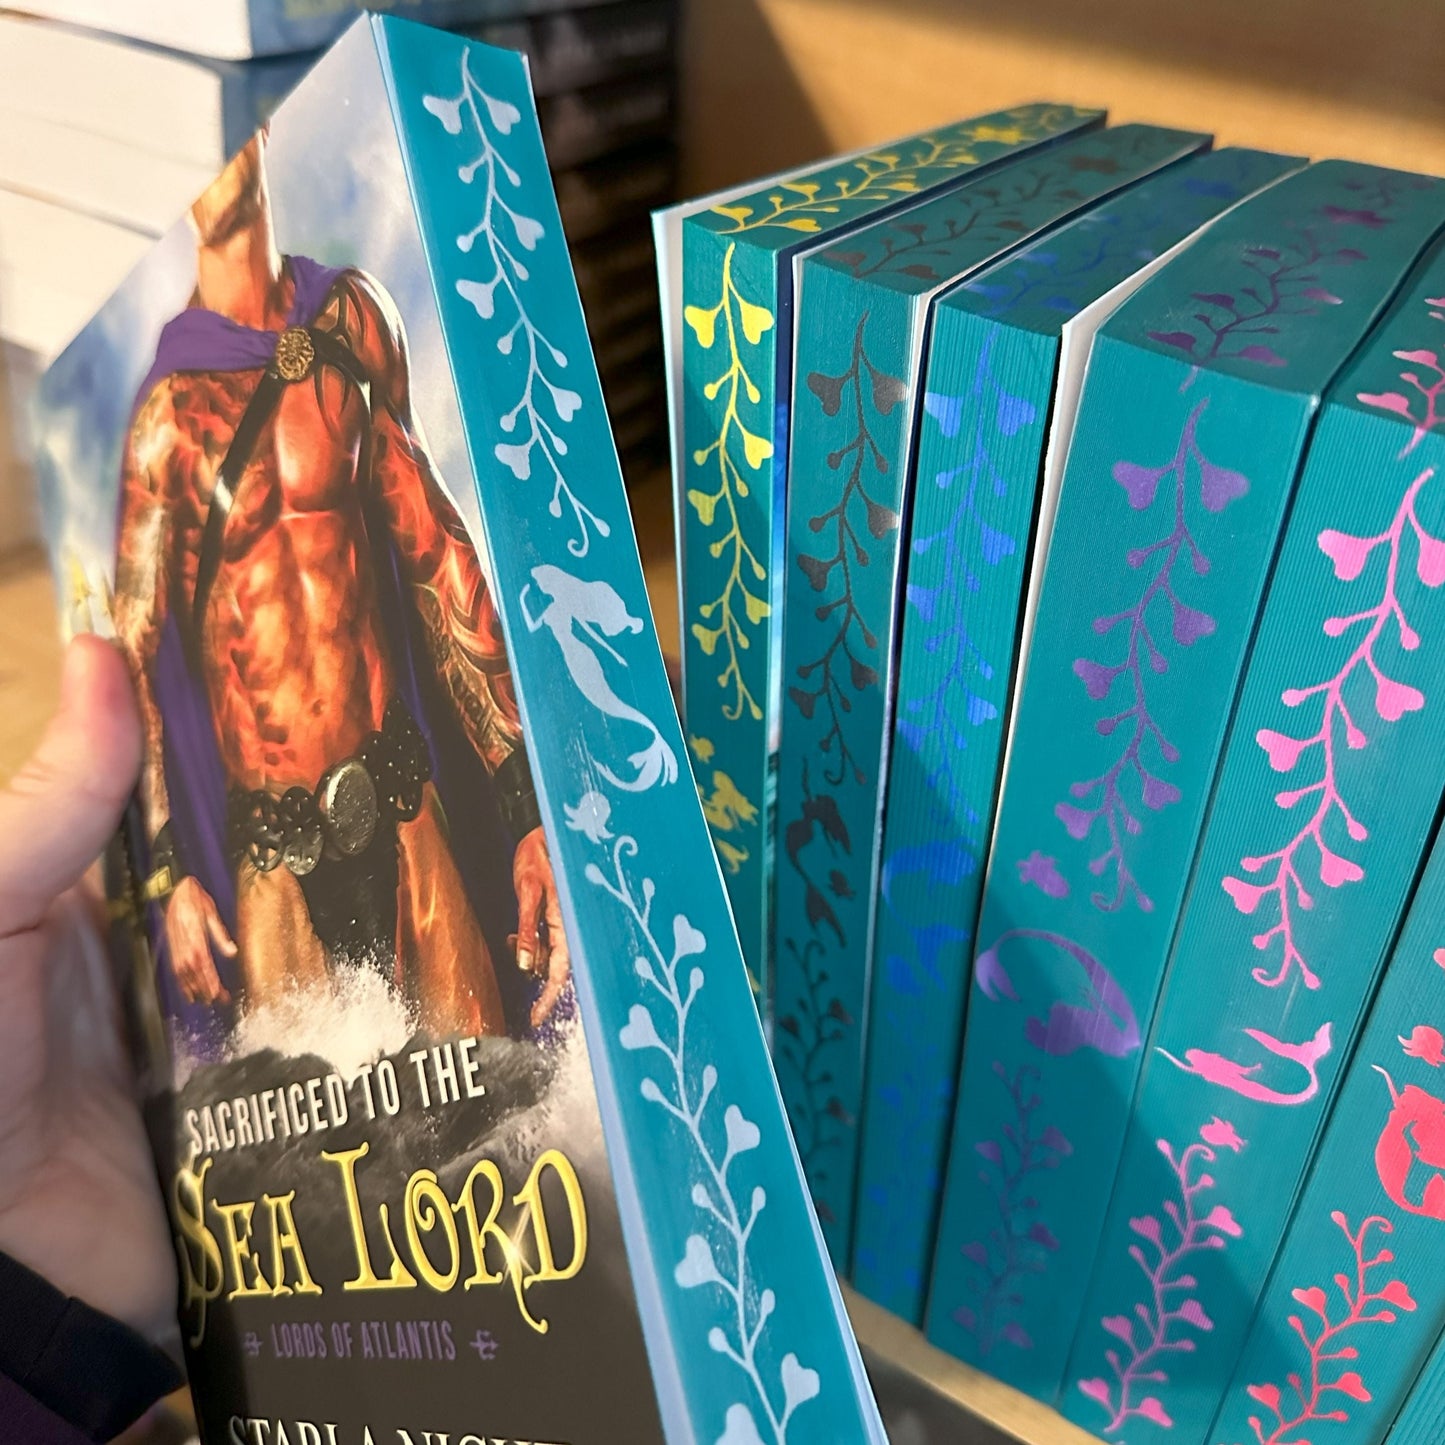 Lords of Atlantis Signed Paperbacks - IMPERFECT Sprayed Edges